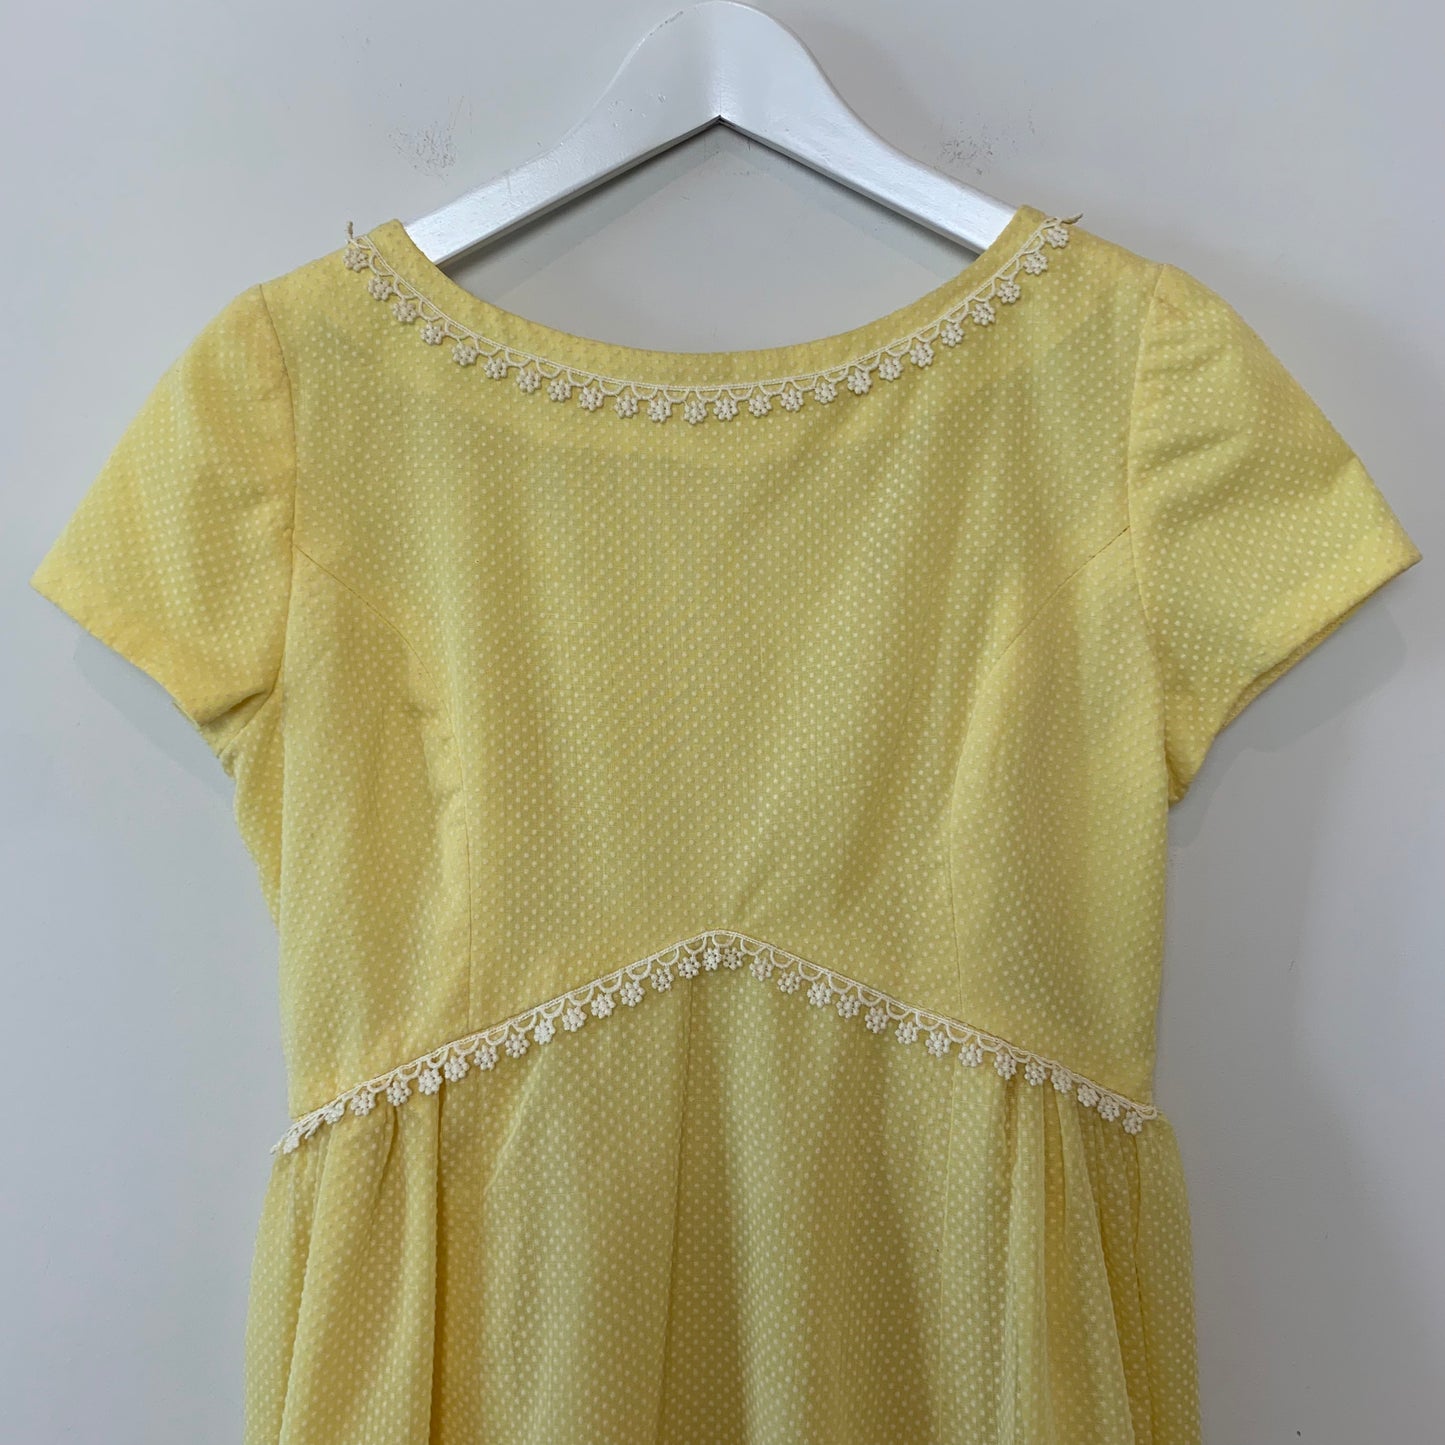 Vintage 70s Yellow Juliet Dress Gown Short Sleeve Daisy Flower Embroidery